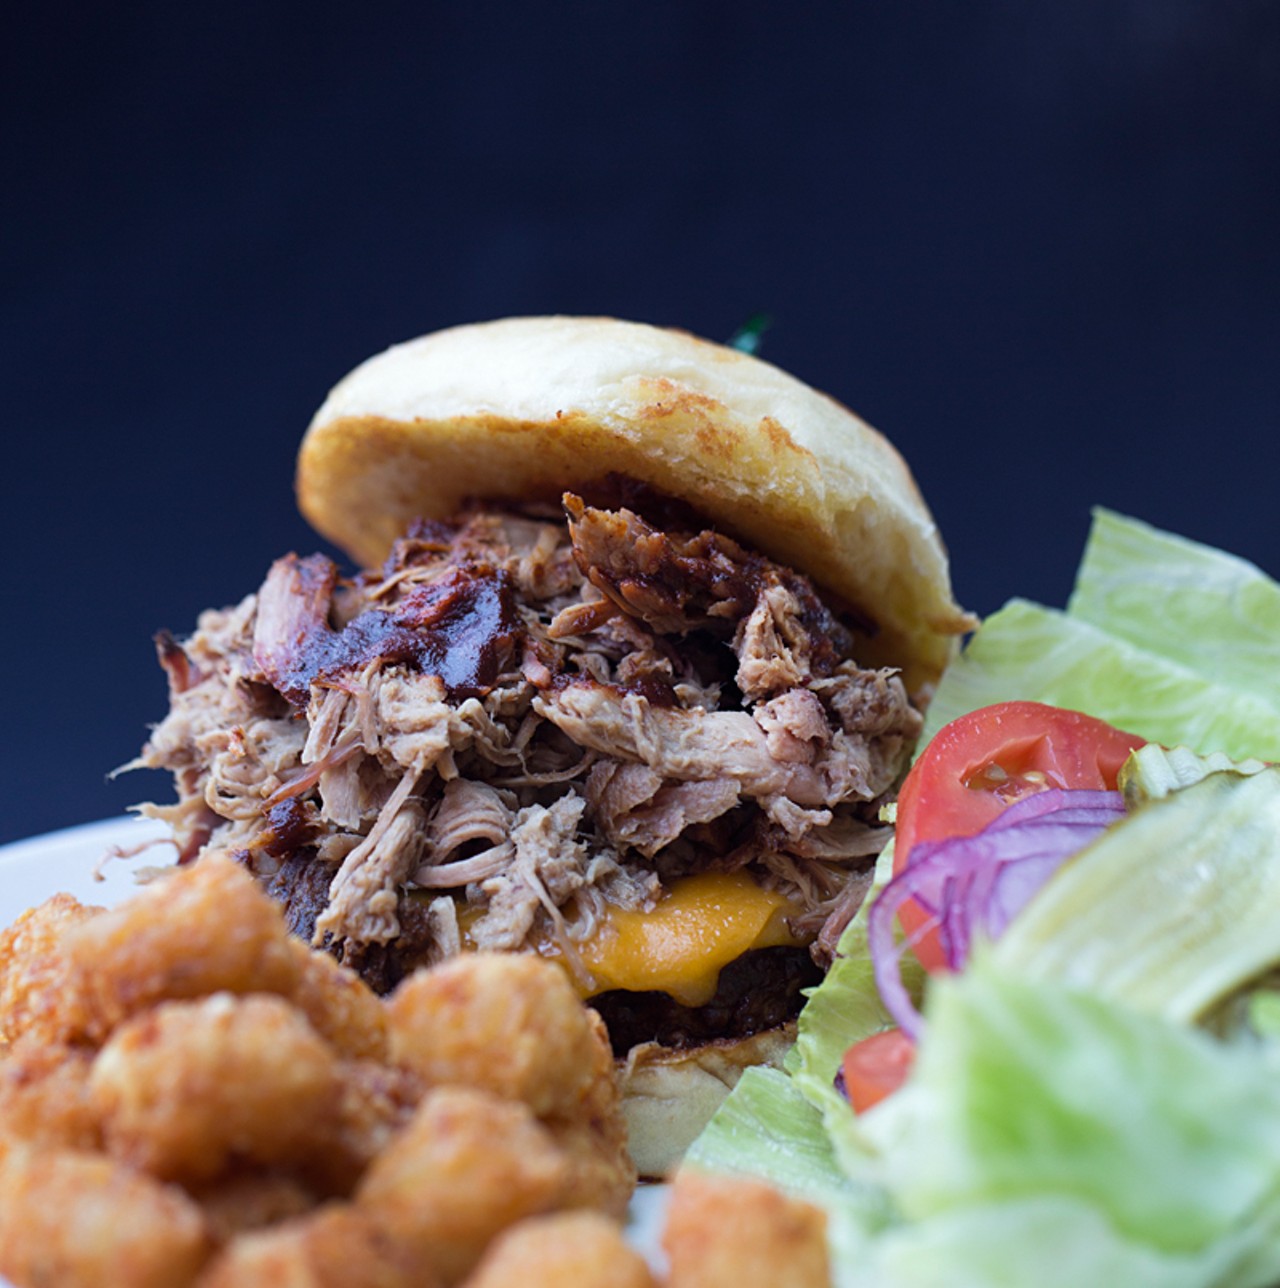 The "Philthy" burger is dipped in barbecue sauce and topped with cheddar cheese. Though pulled pork is shown here, diners have their choice of beef brisket, pulled pork or pulled chicken.